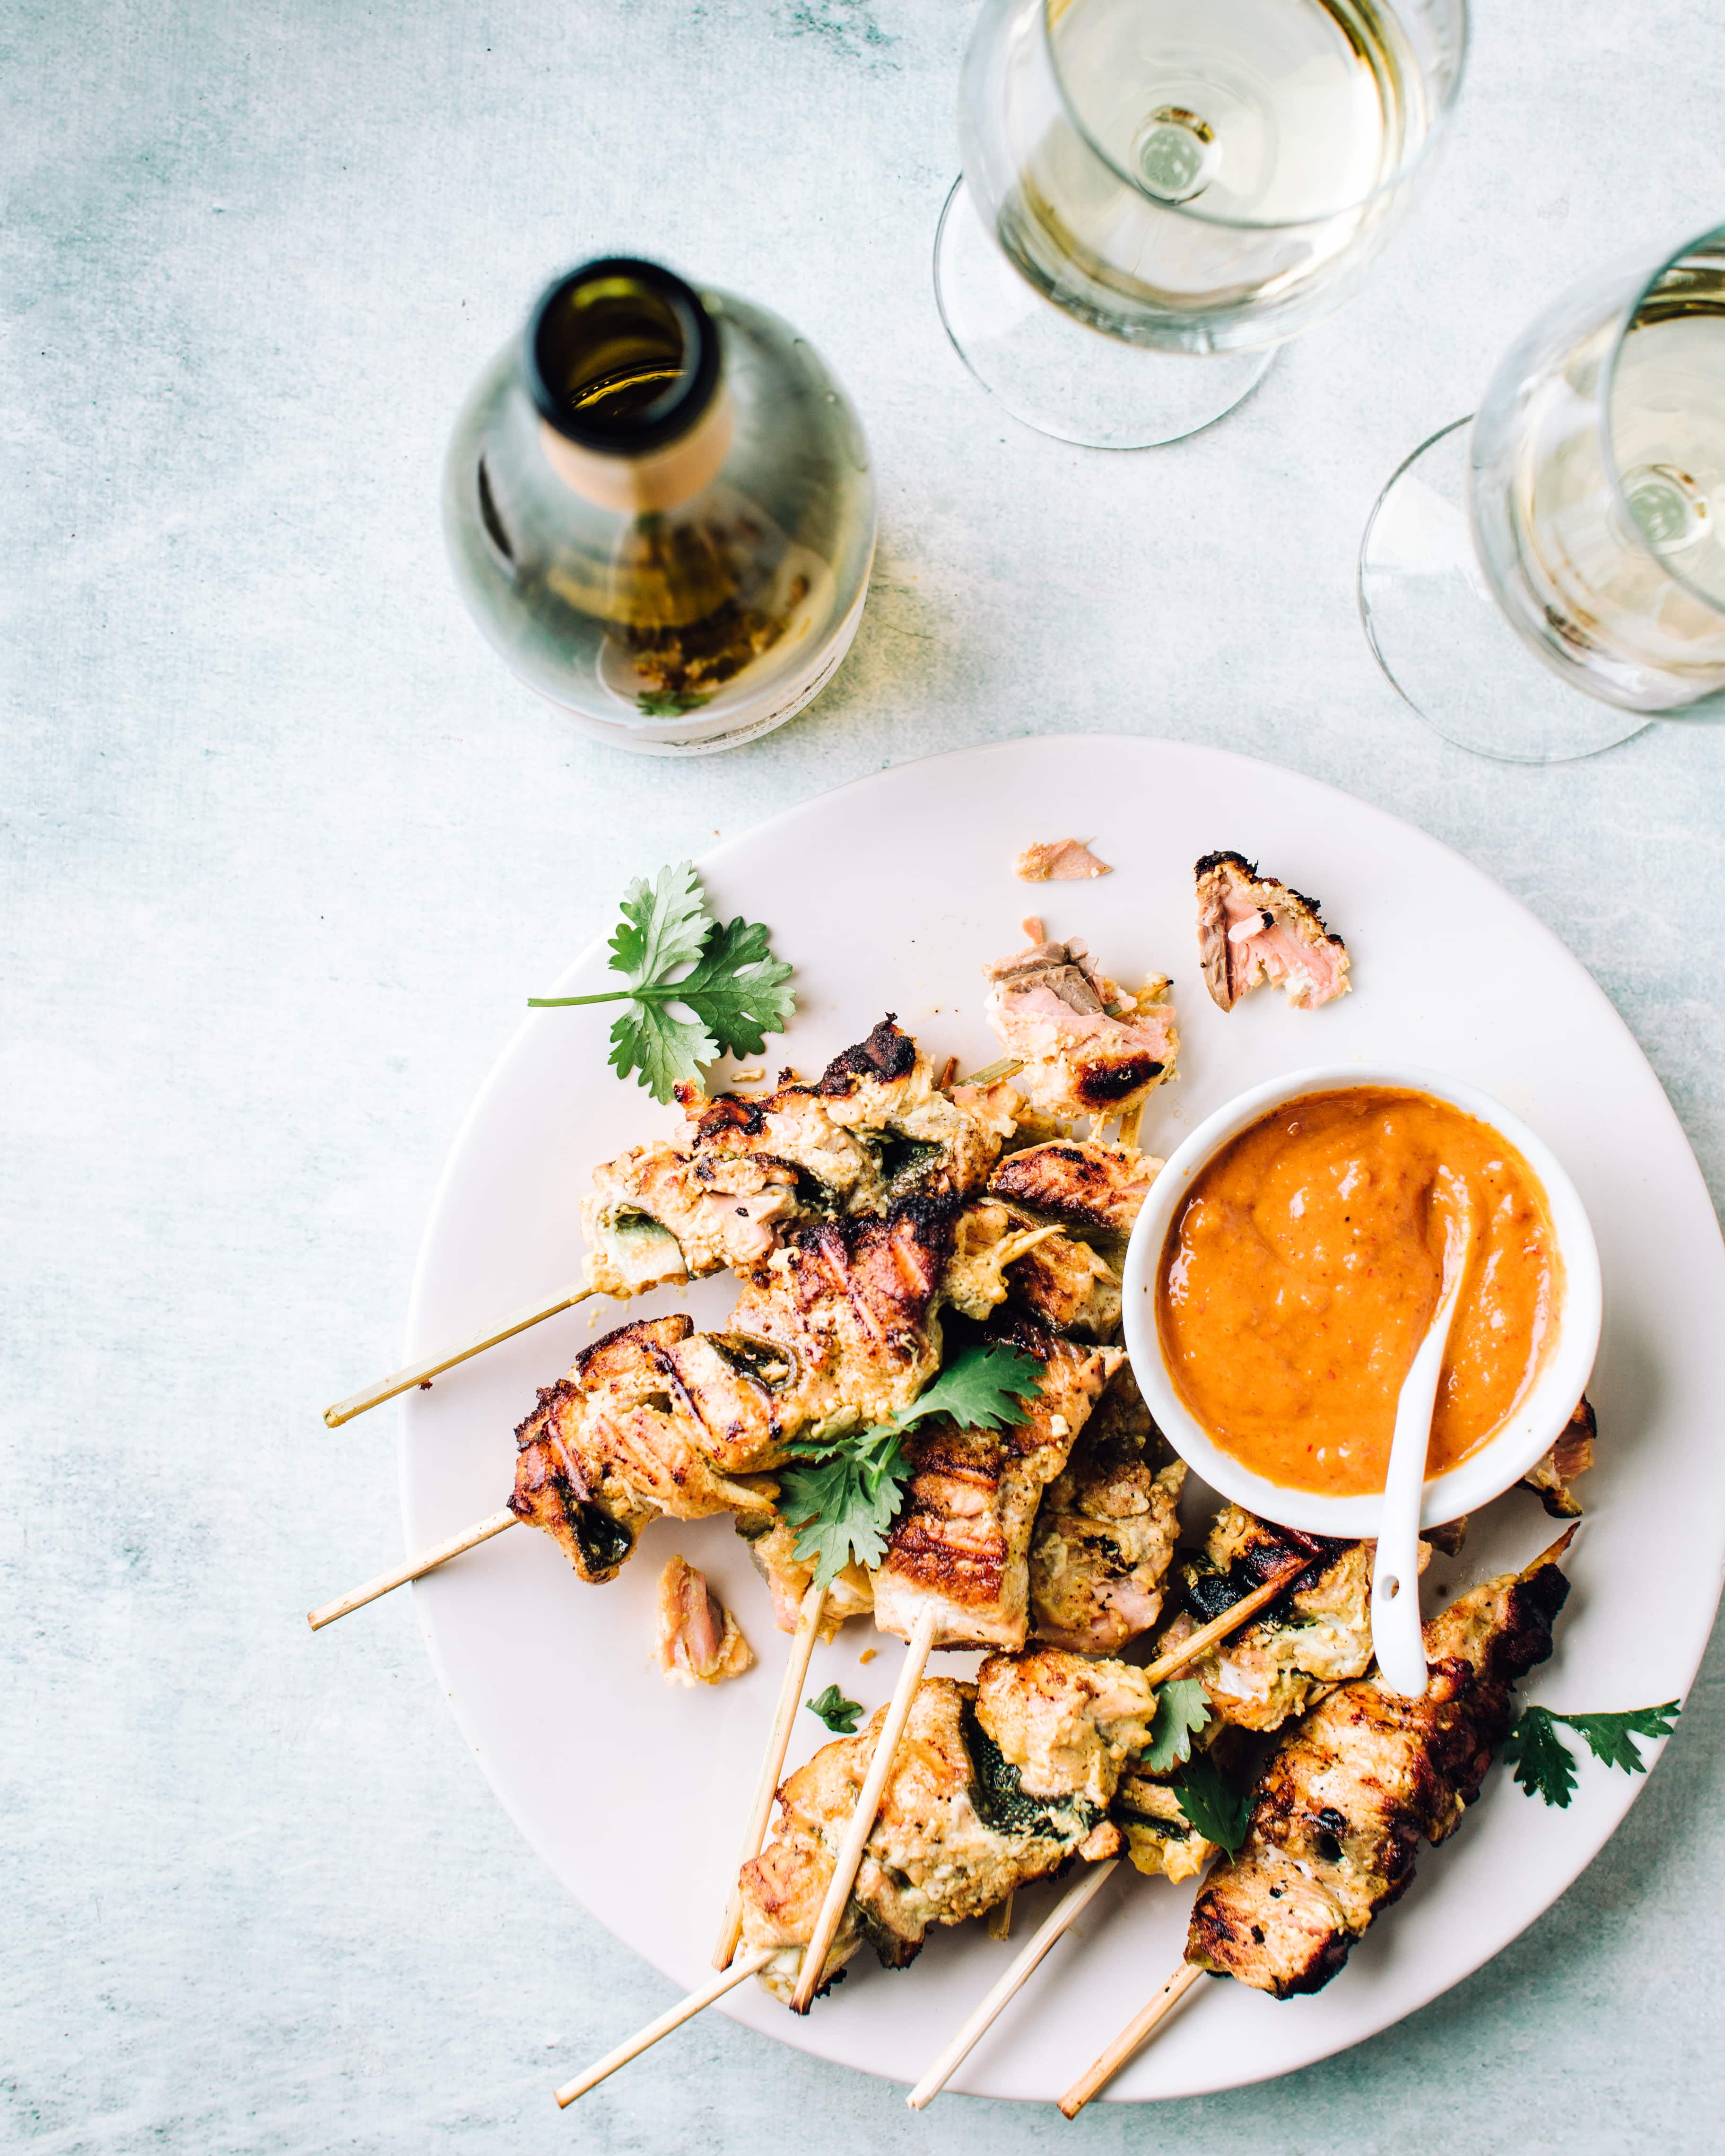 Grilled Coconut Salmon Skewers with Peanut Sauce | Foodess Recipes